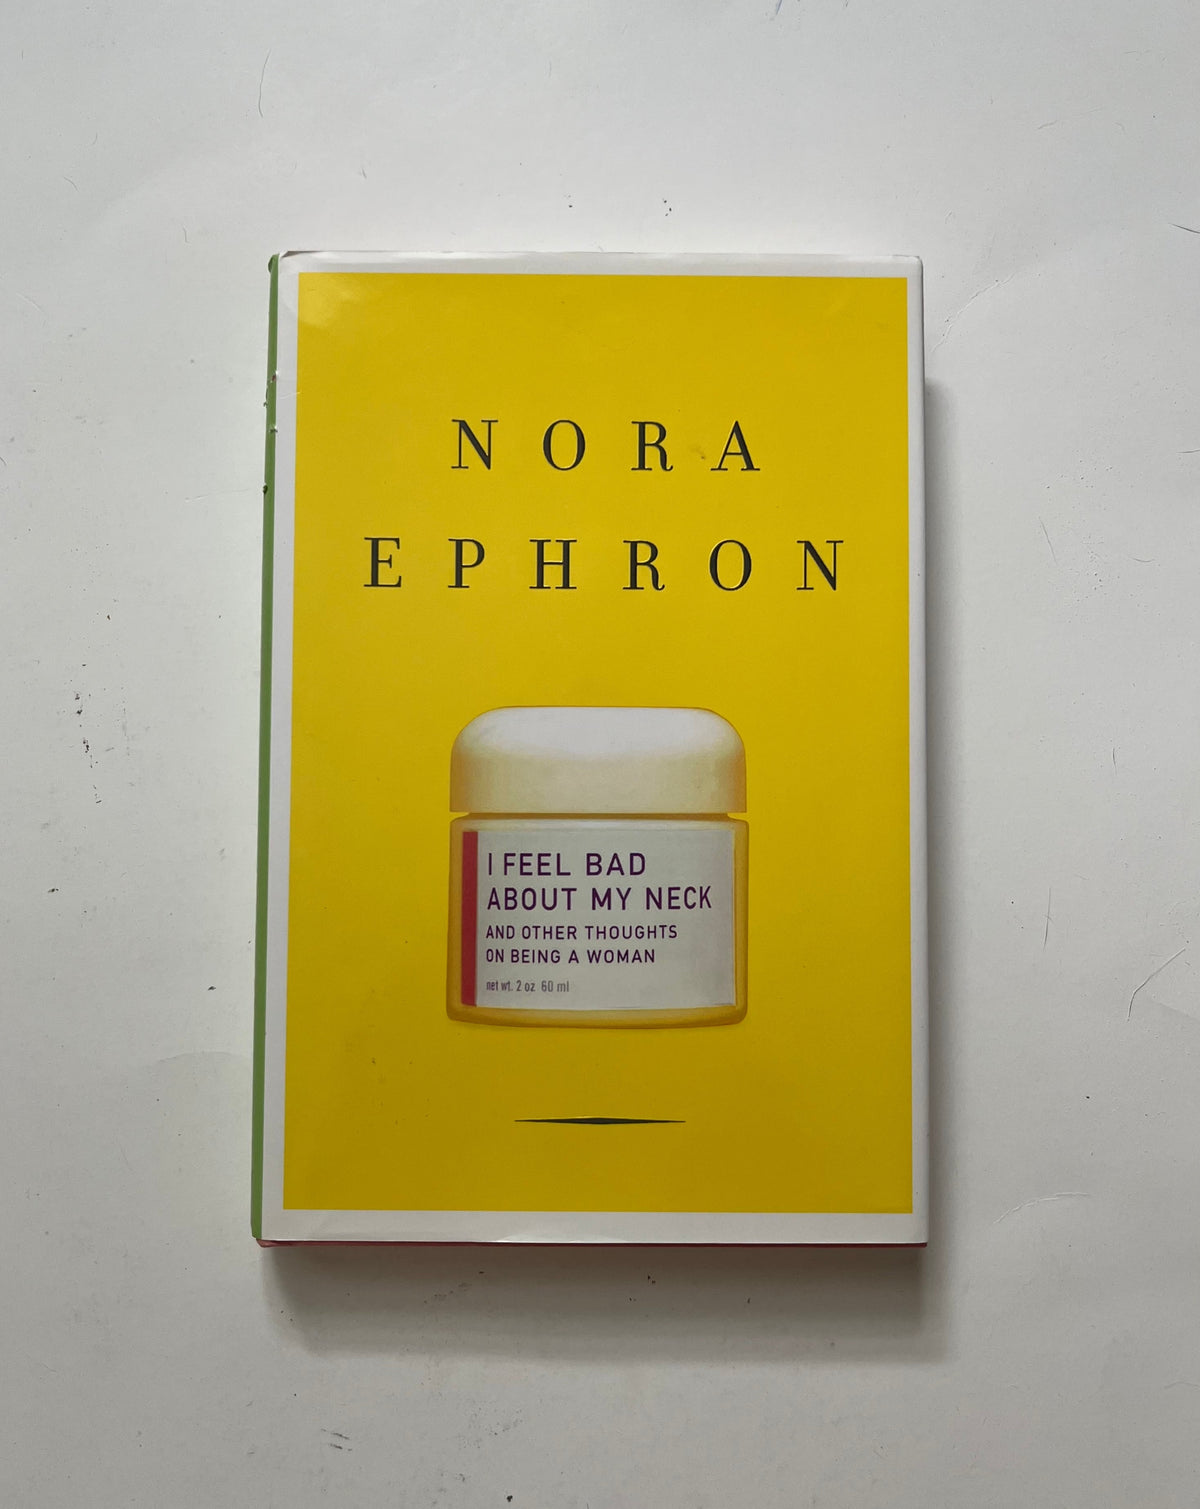 I Feel Bad About My Neck and Other Thoughts on Being a Woman by Nora Ephron